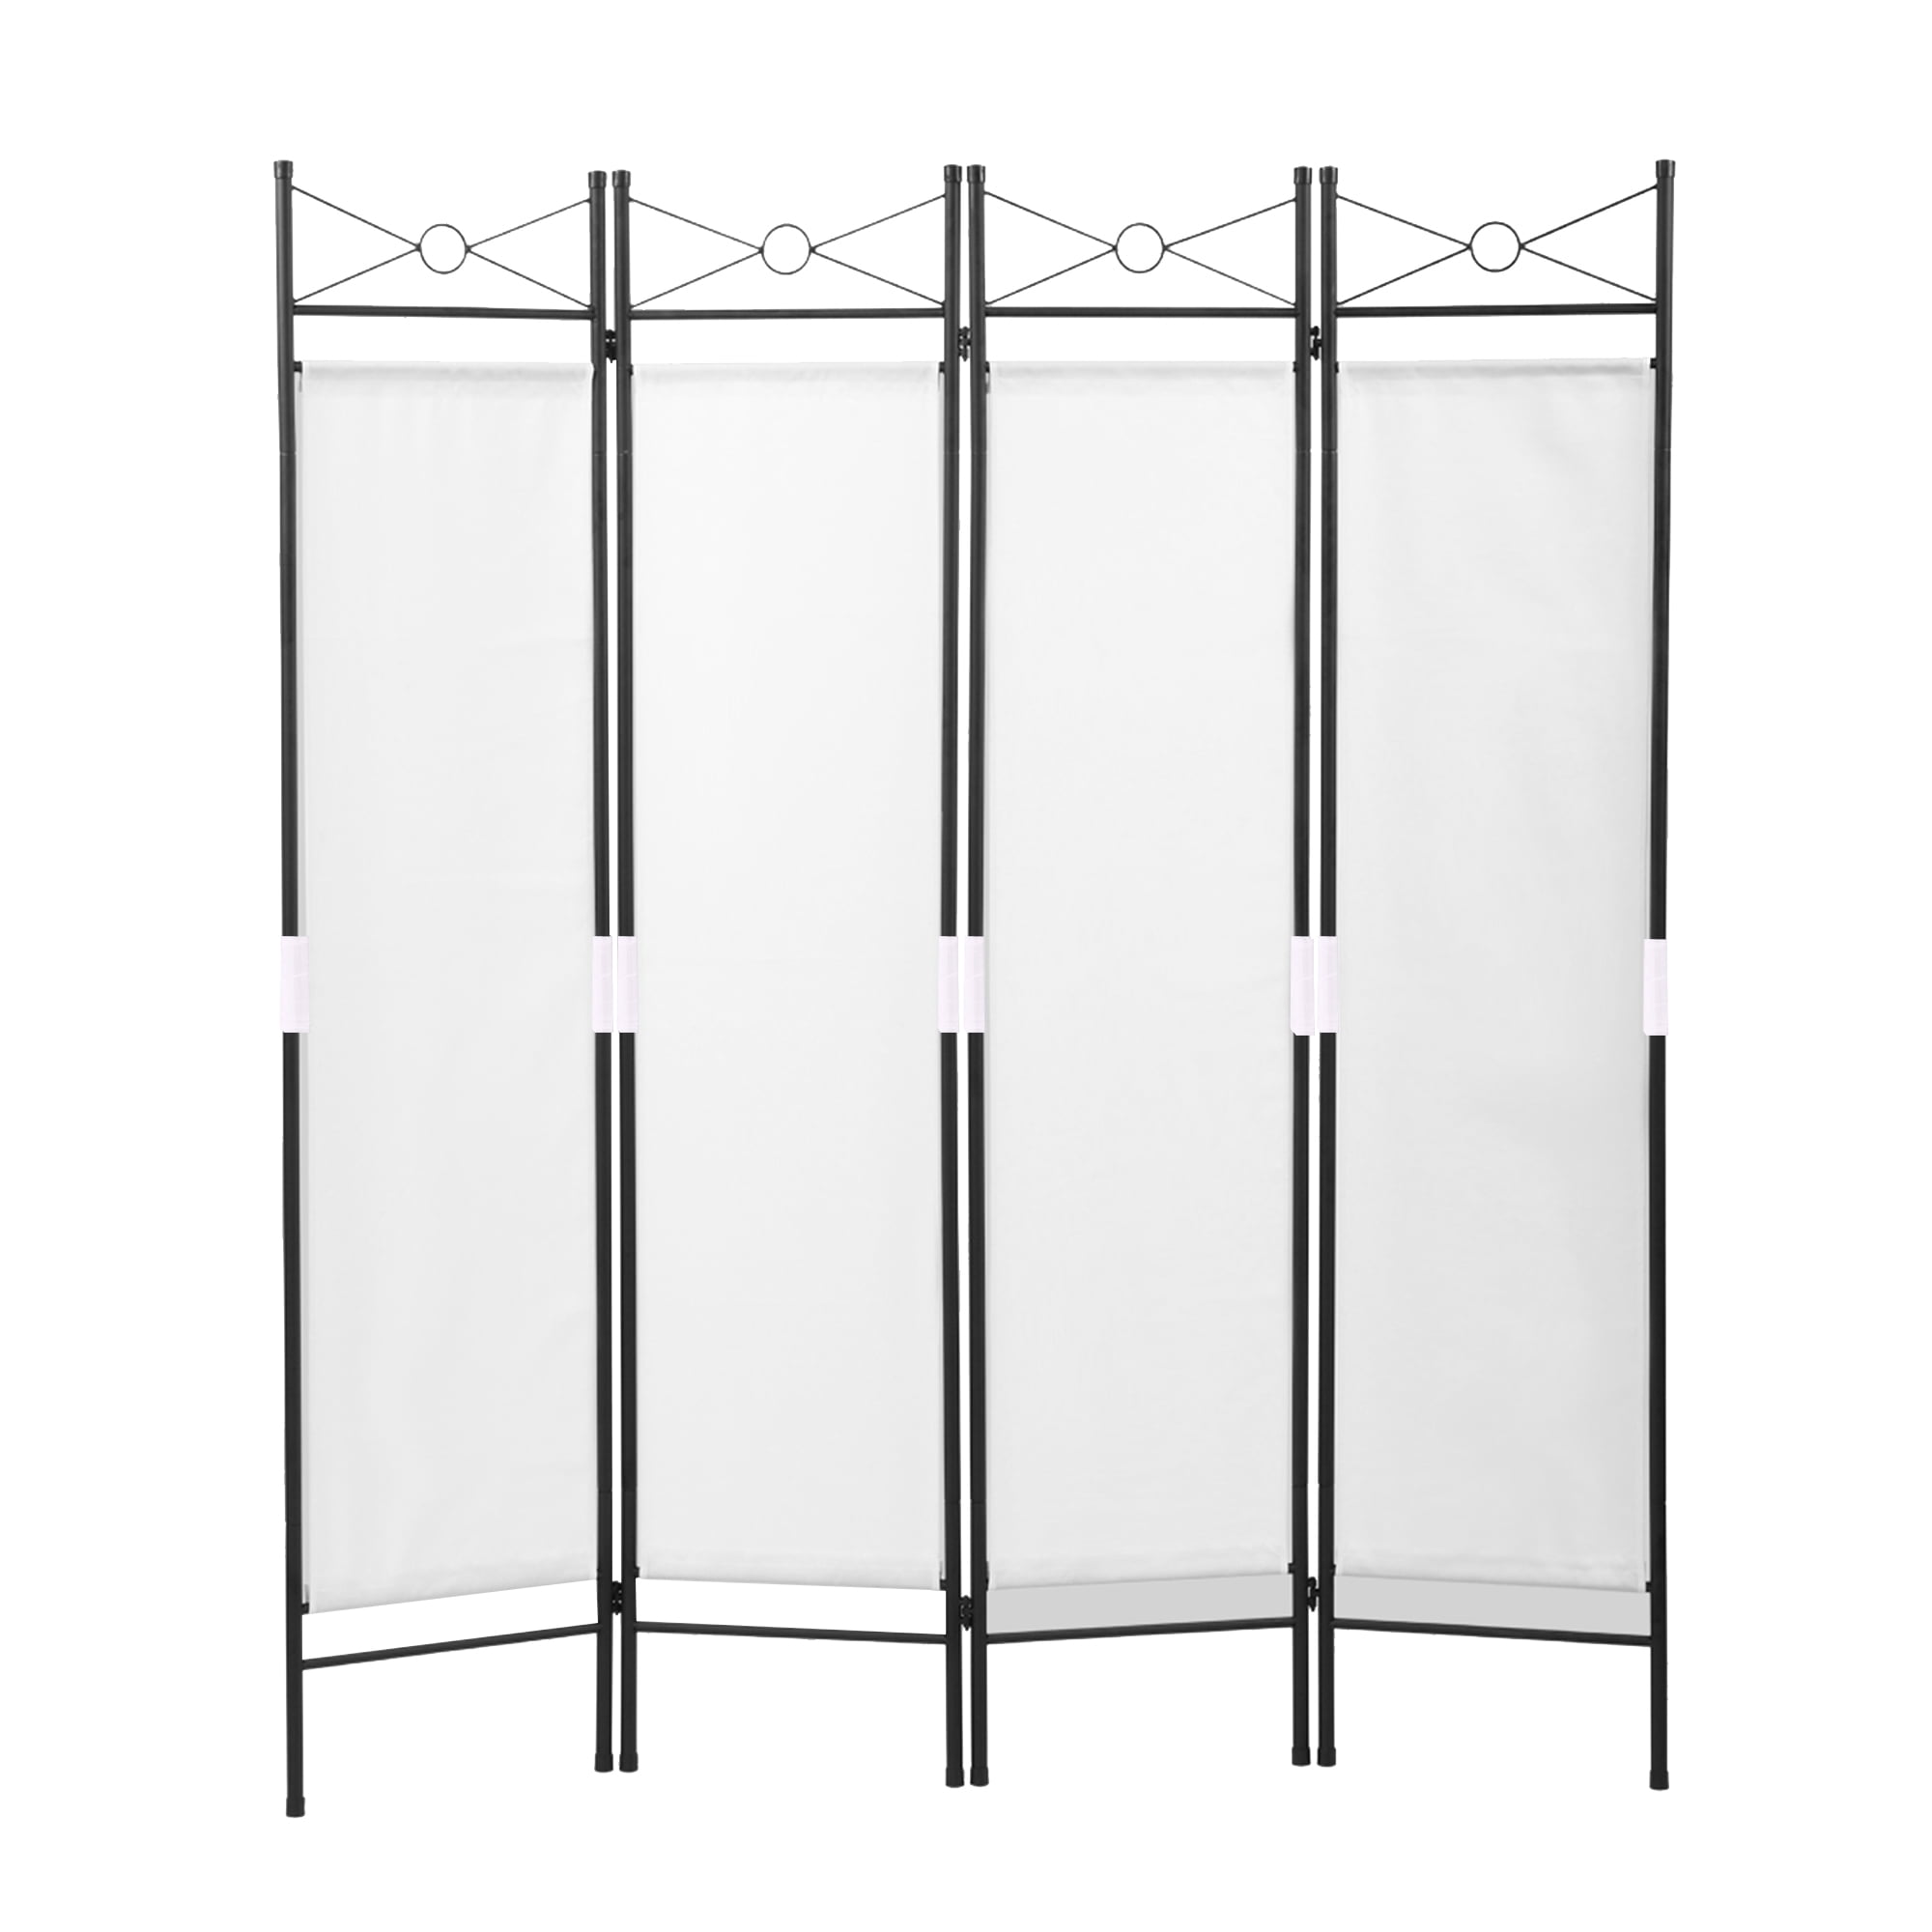 ROOM DIVIDER Privacy Screen 4 Panel Folding Partition Home Office Decor White 